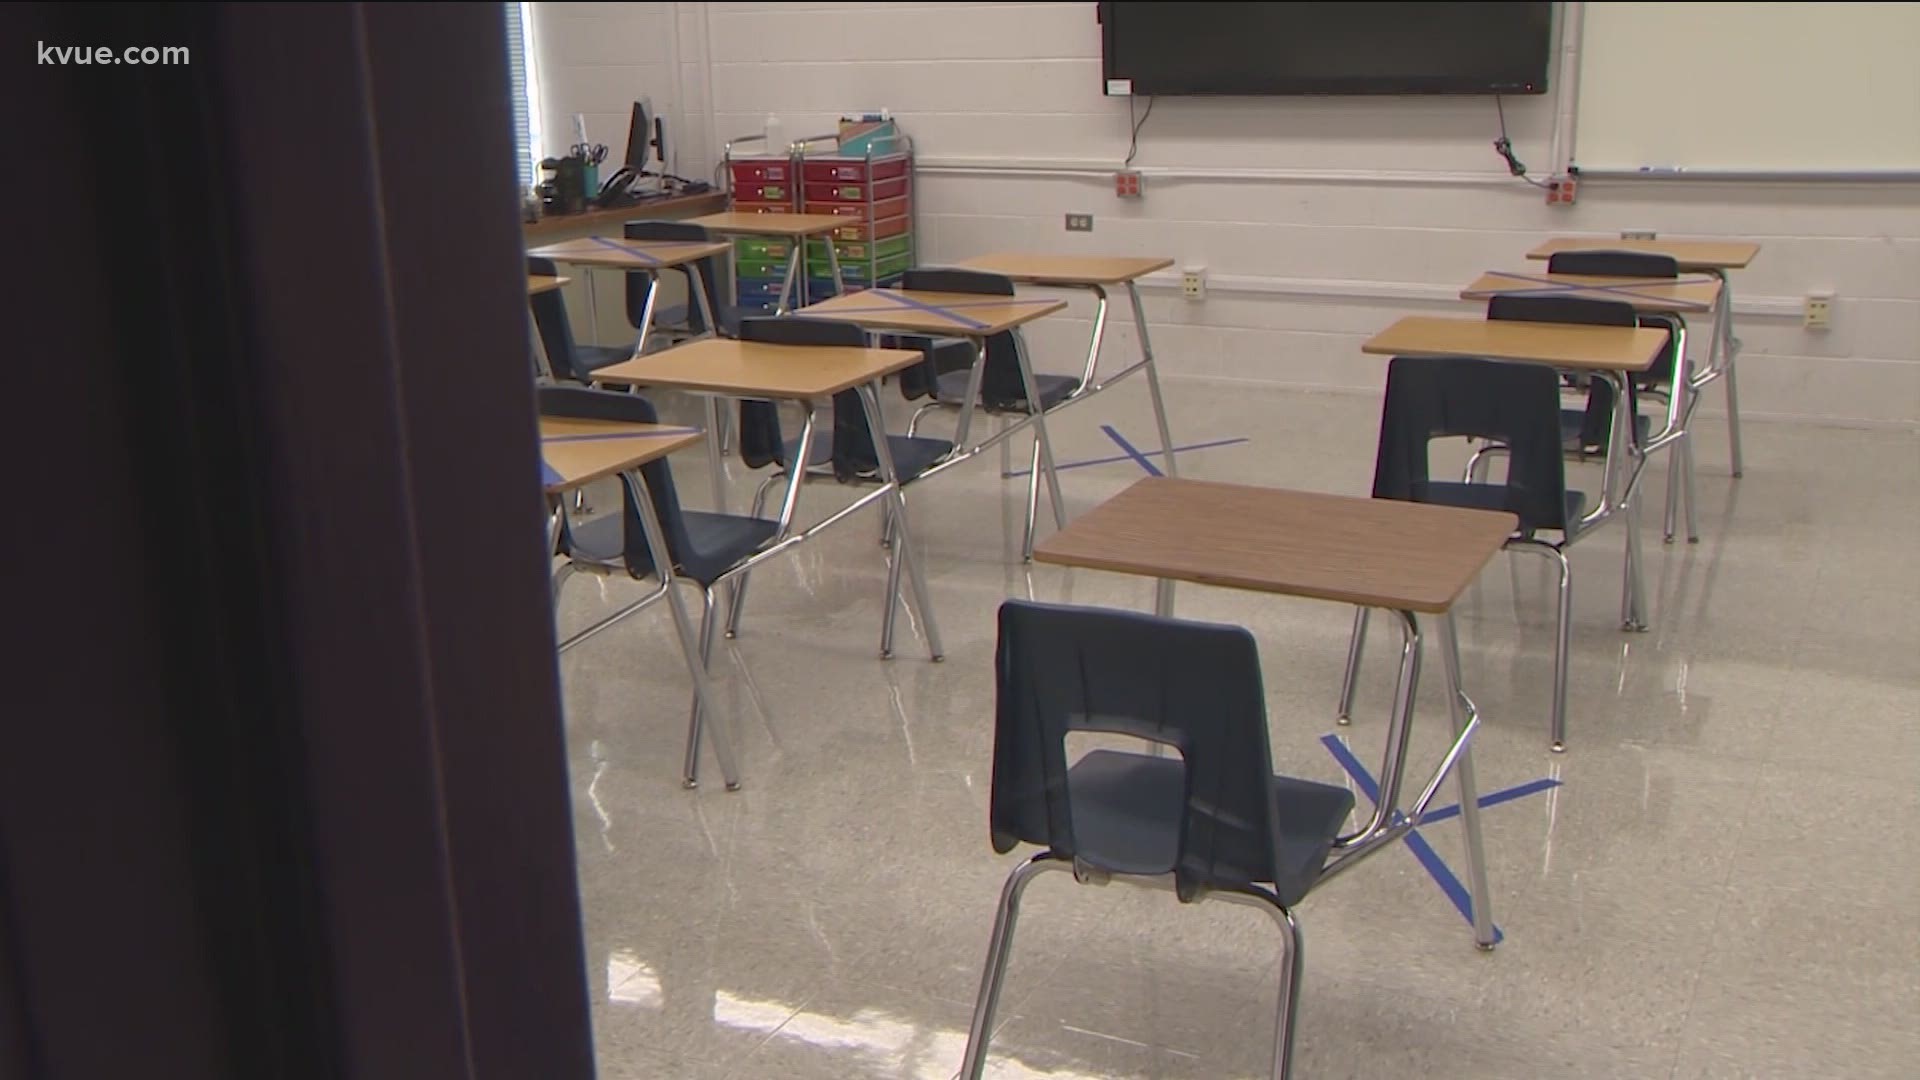 School leaders said they started working on a back-to-school plan back in May when school was canceled, and with many changes, they are confident in this one.